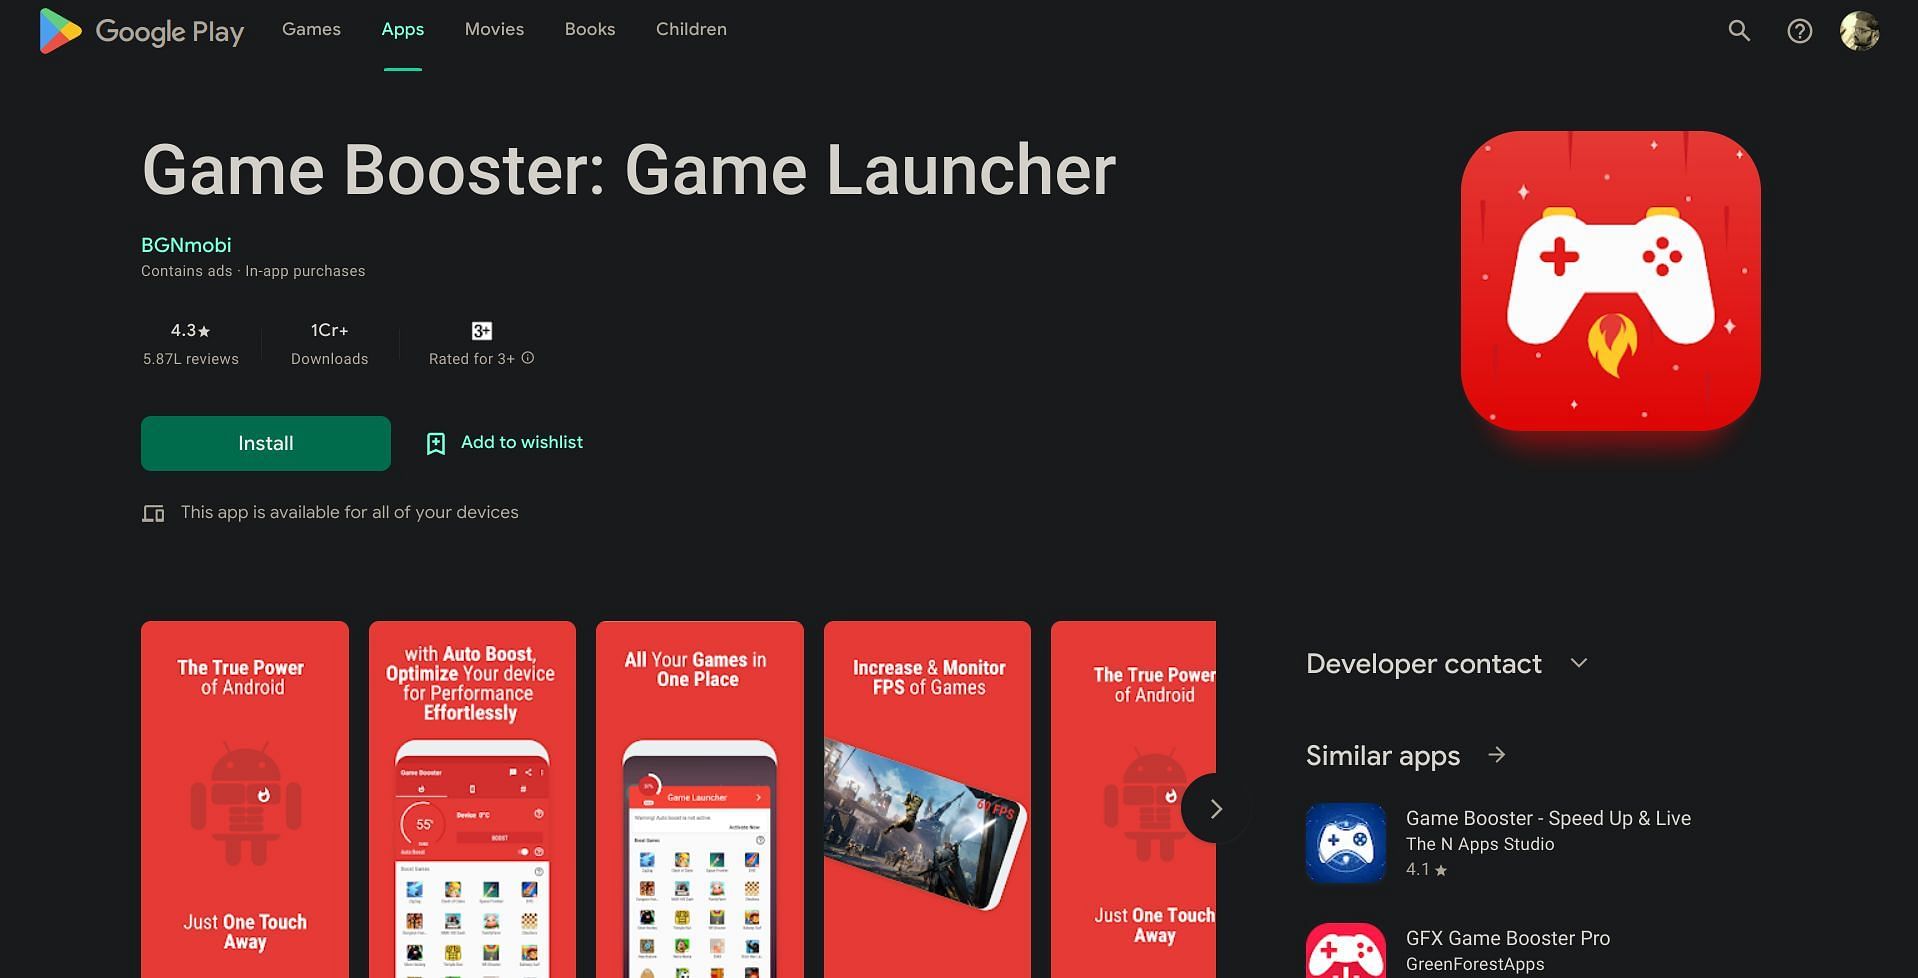 Game Booster (Image via Google Play Store)